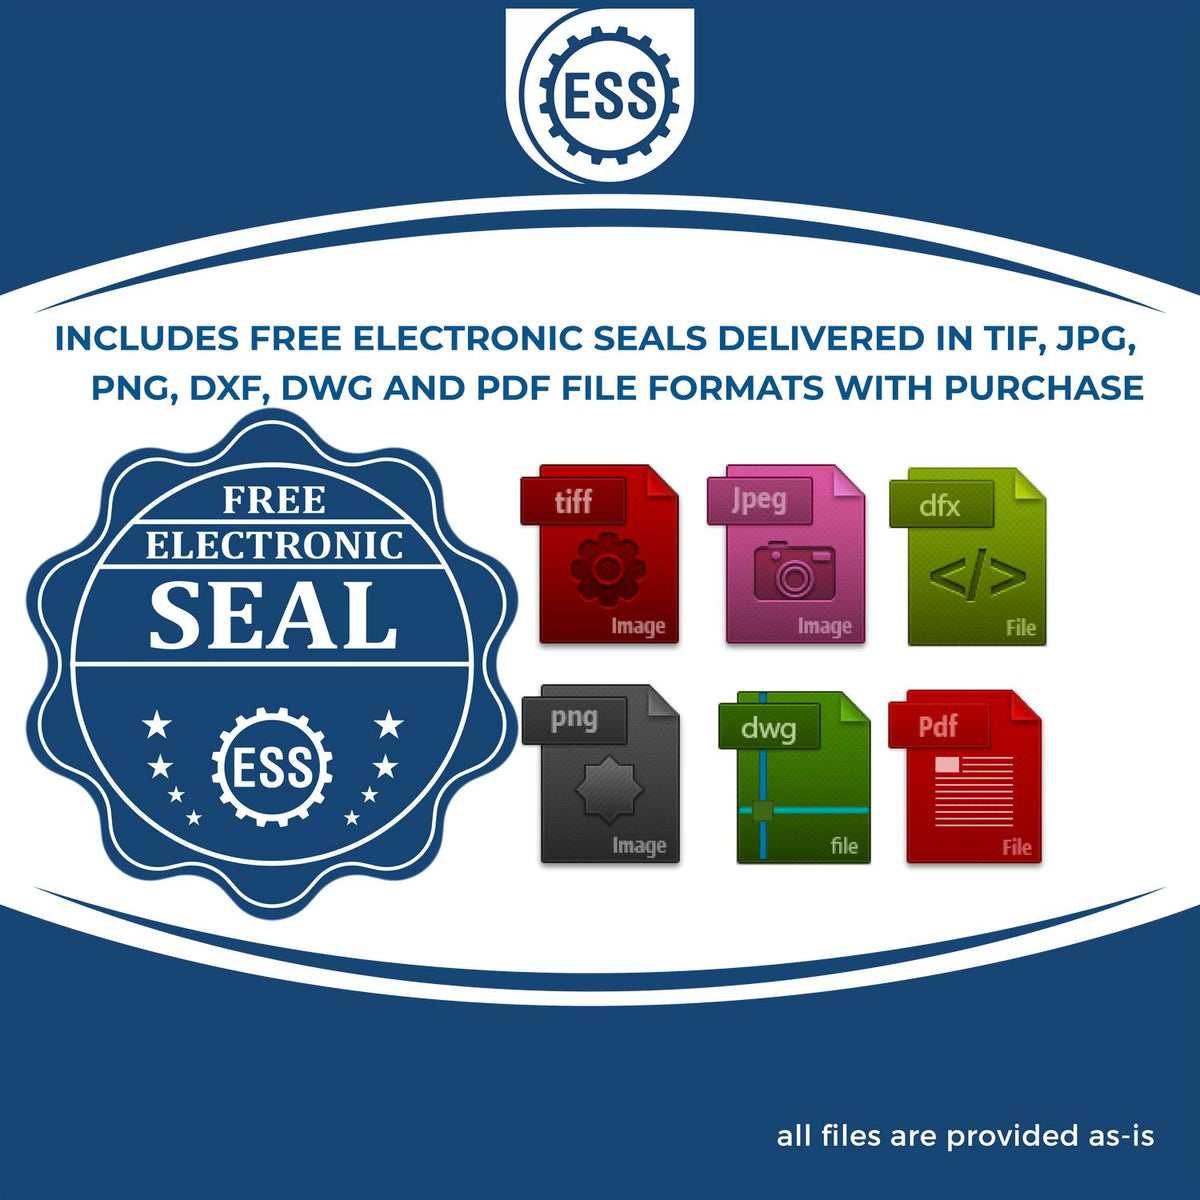 An infographic for the free electronic seal for the Soft Ohio Professional Geologist Seal illustrating the different file type icons such as DXF, DWG, TIF, JPG and PNG.